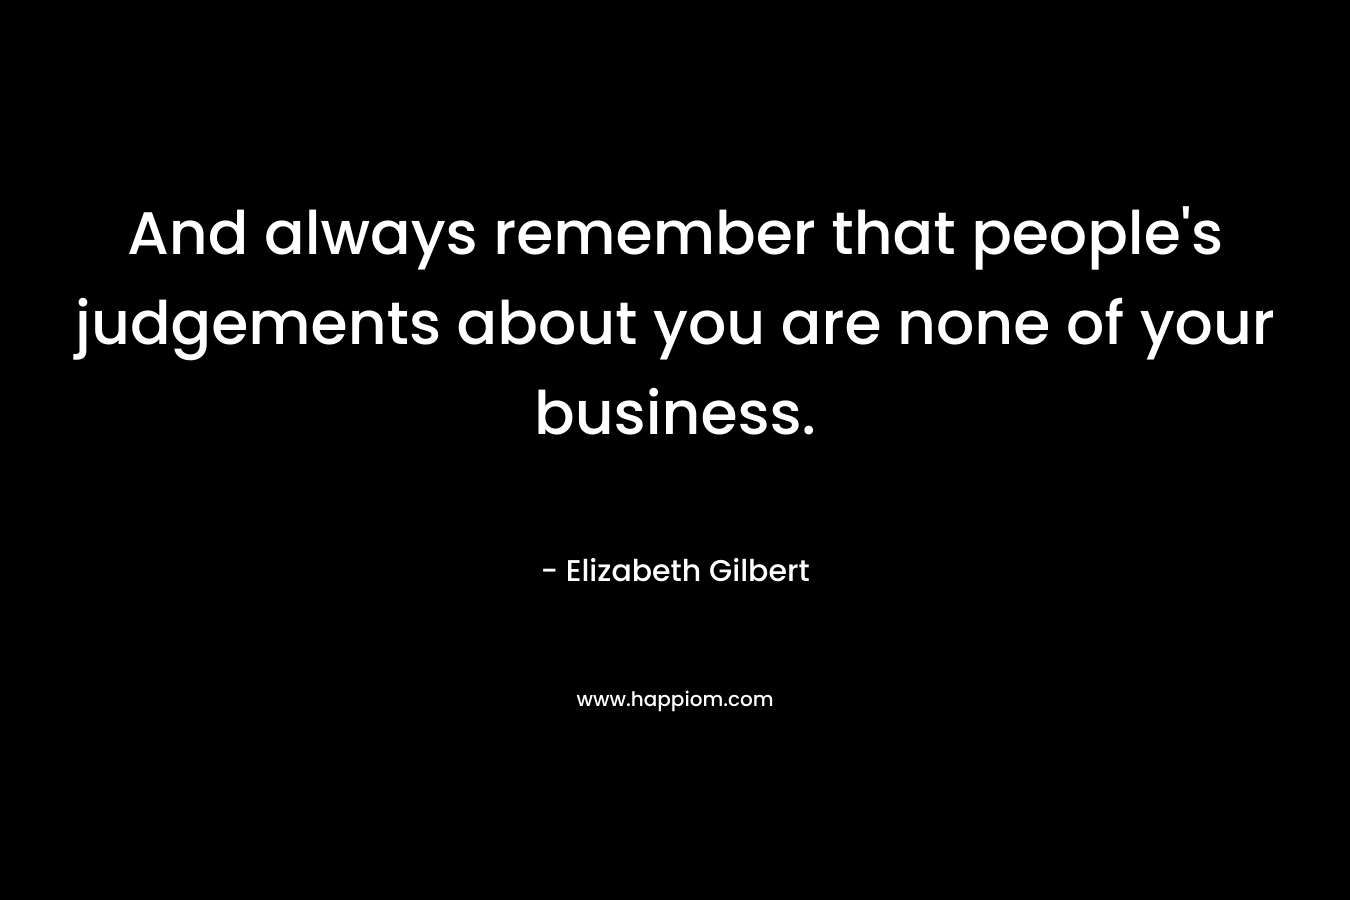 And always remember that people's judgements about you are none of your business.